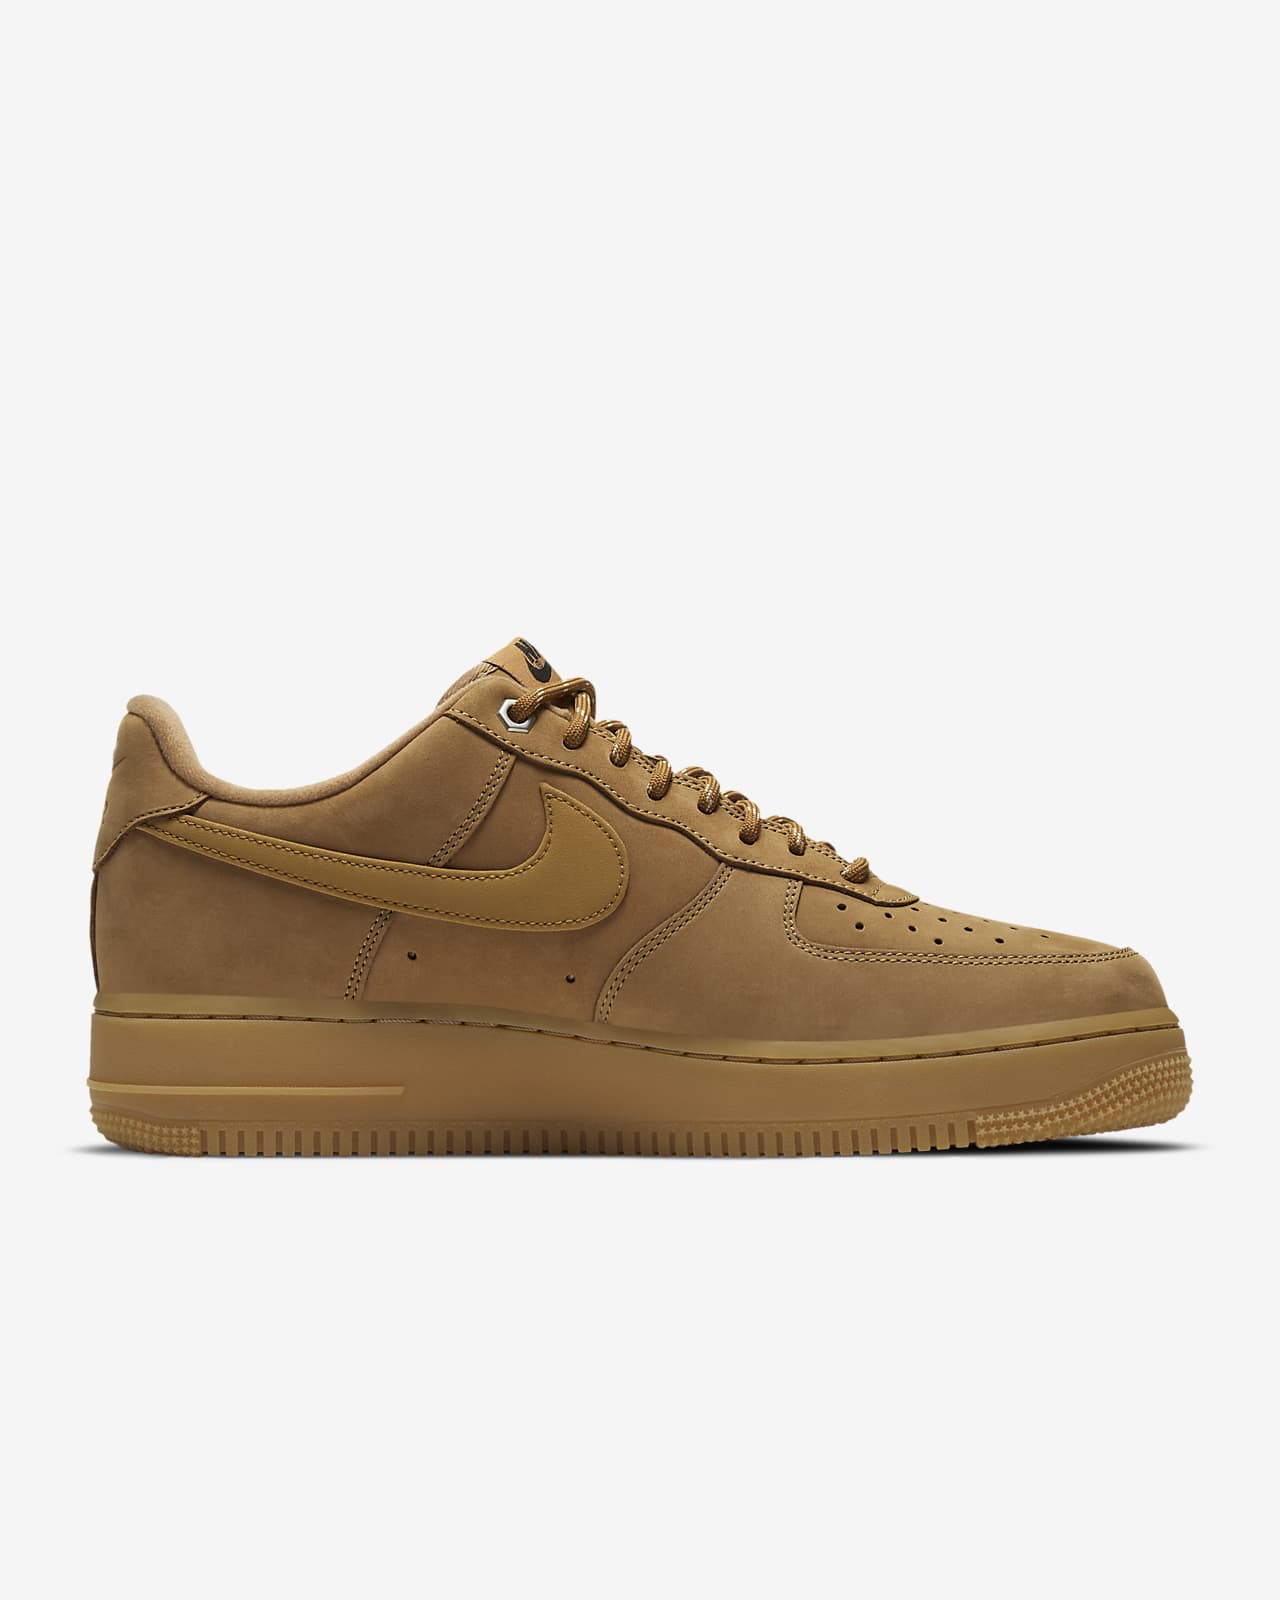 Nike Air Force 1 '07 WB Men's Shoes